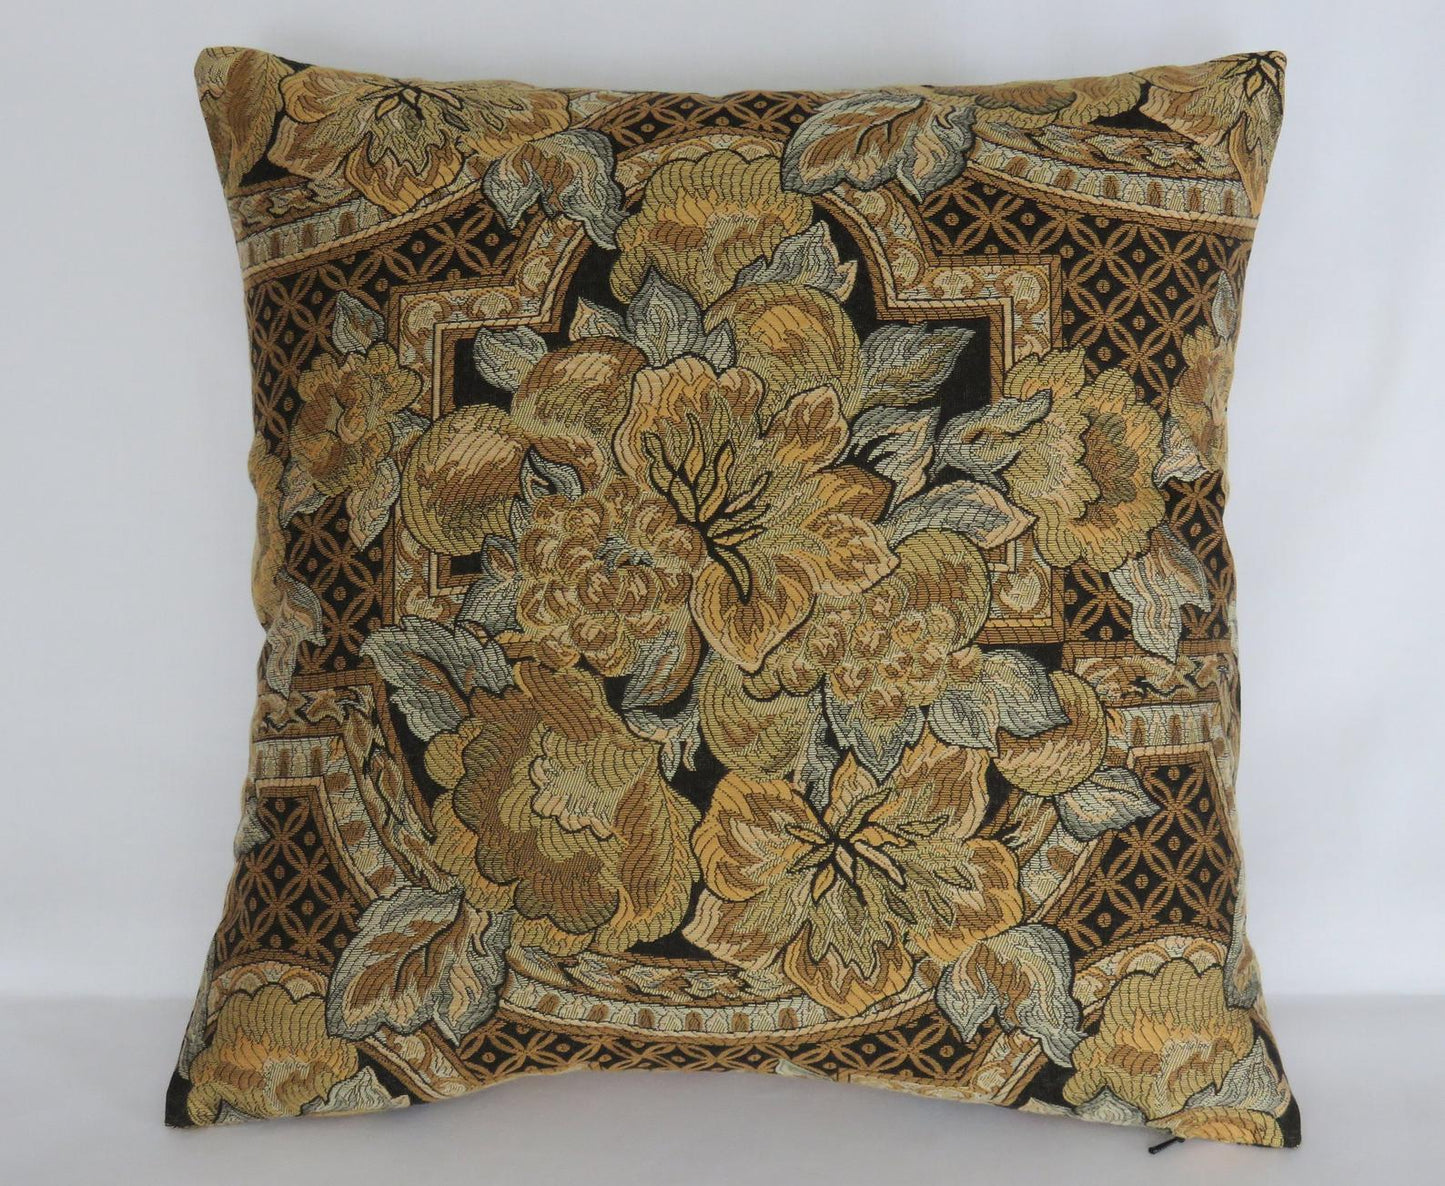 gold floral brocade pillow cover art nouveau or deco lily with black, grey, bronze